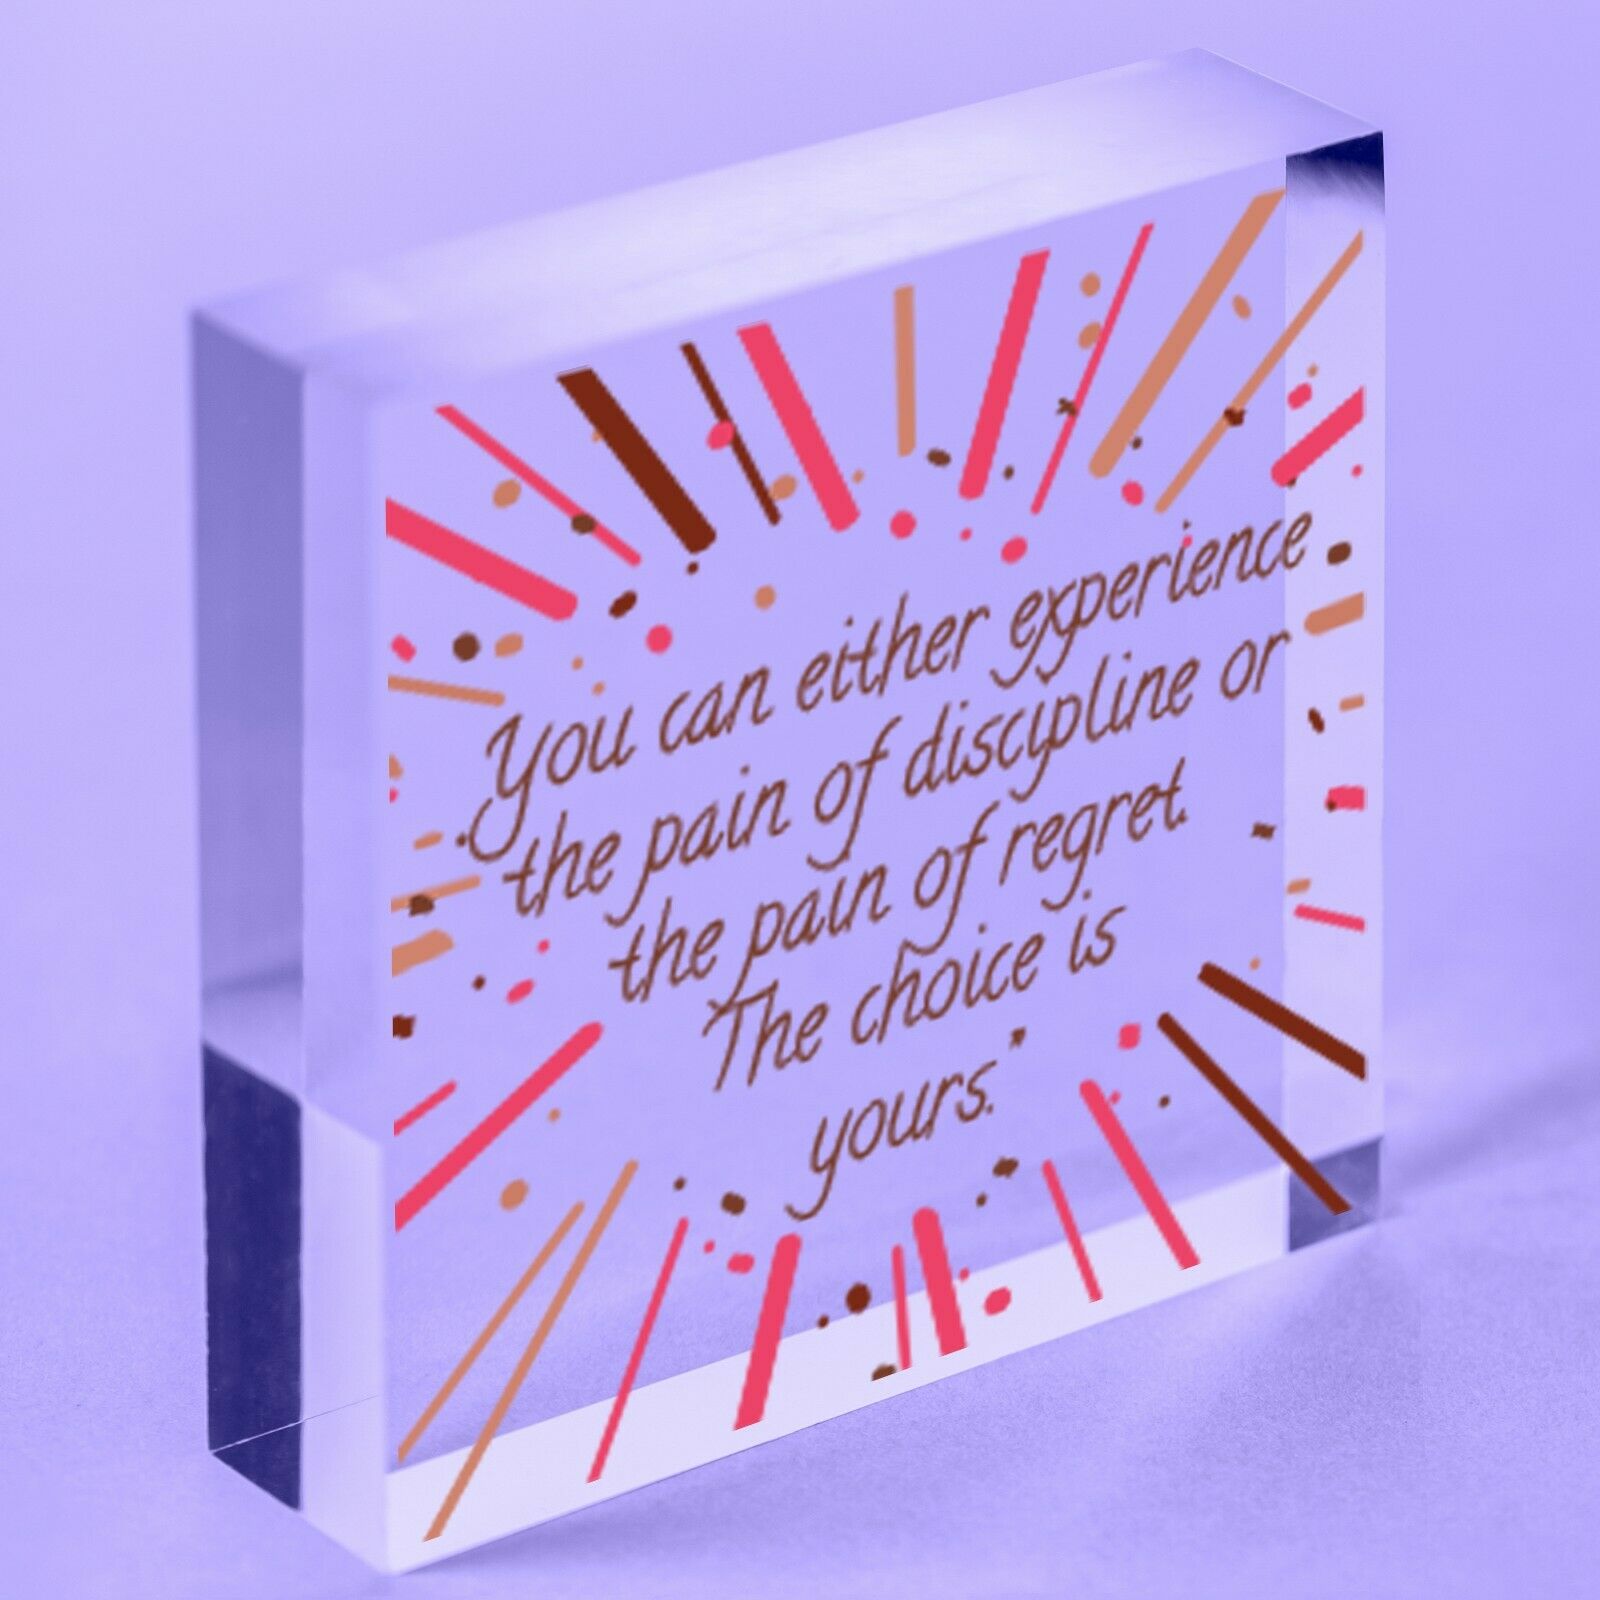 Follow Your Dreams Acrylic Block Shaped Plaque Shabby Chic Inspirational